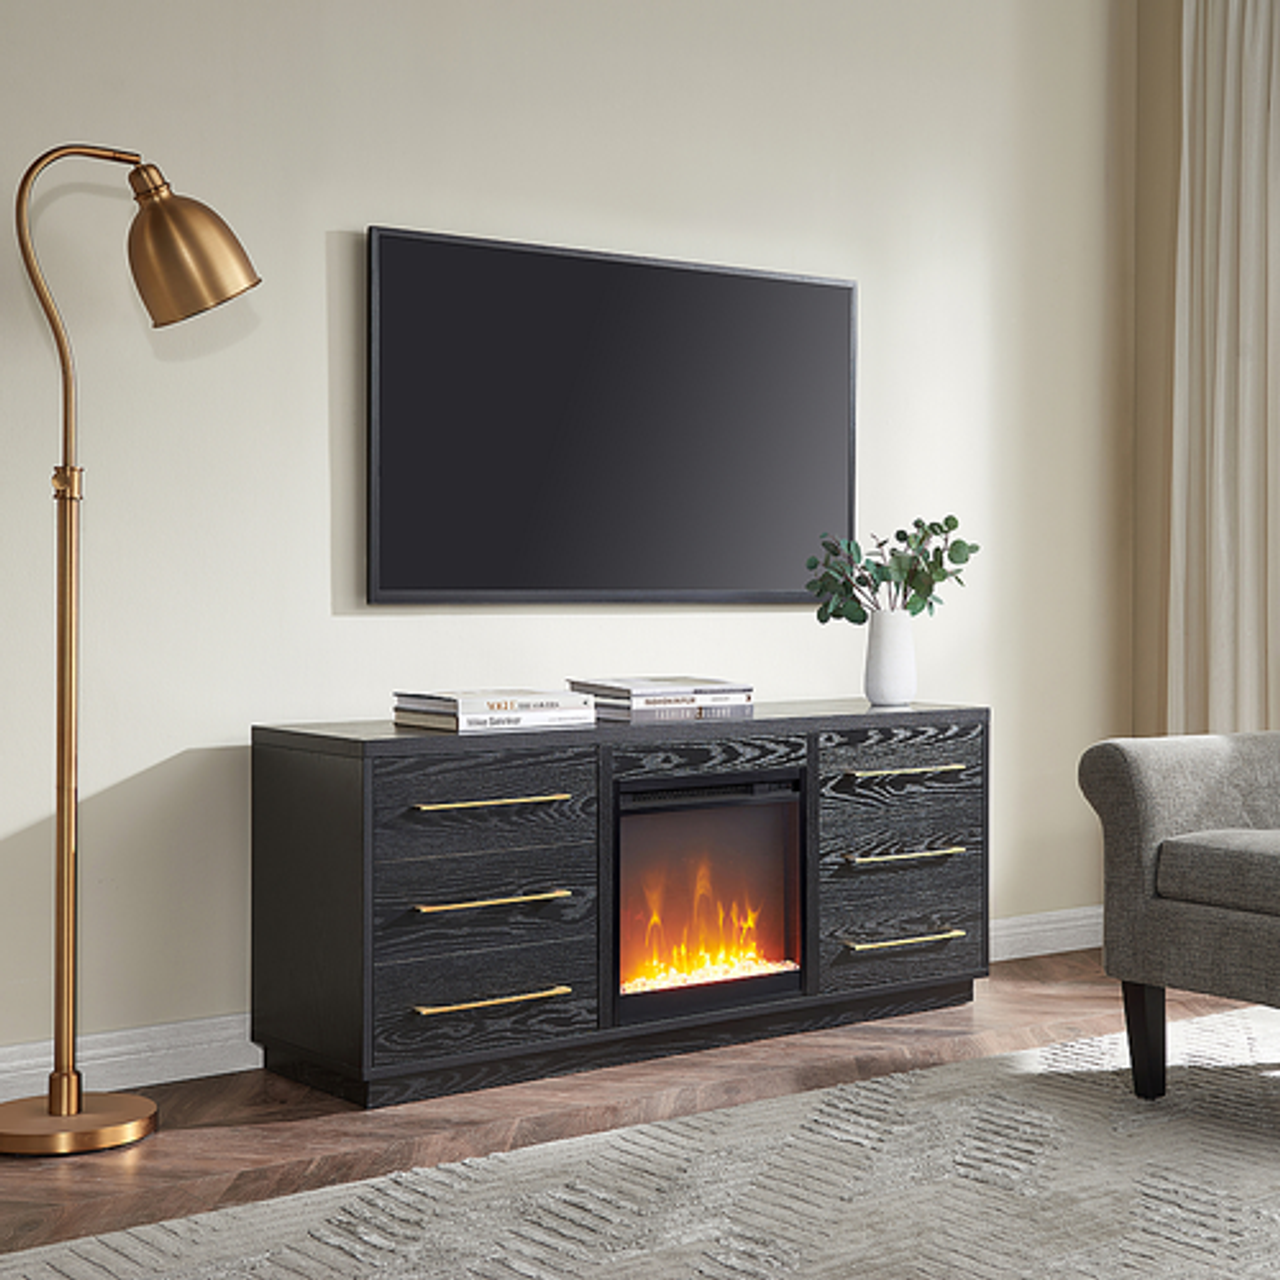 Camden&Wells - Greer Crystal Fireplace TV Stand for TVs up to 65" - Black Grain